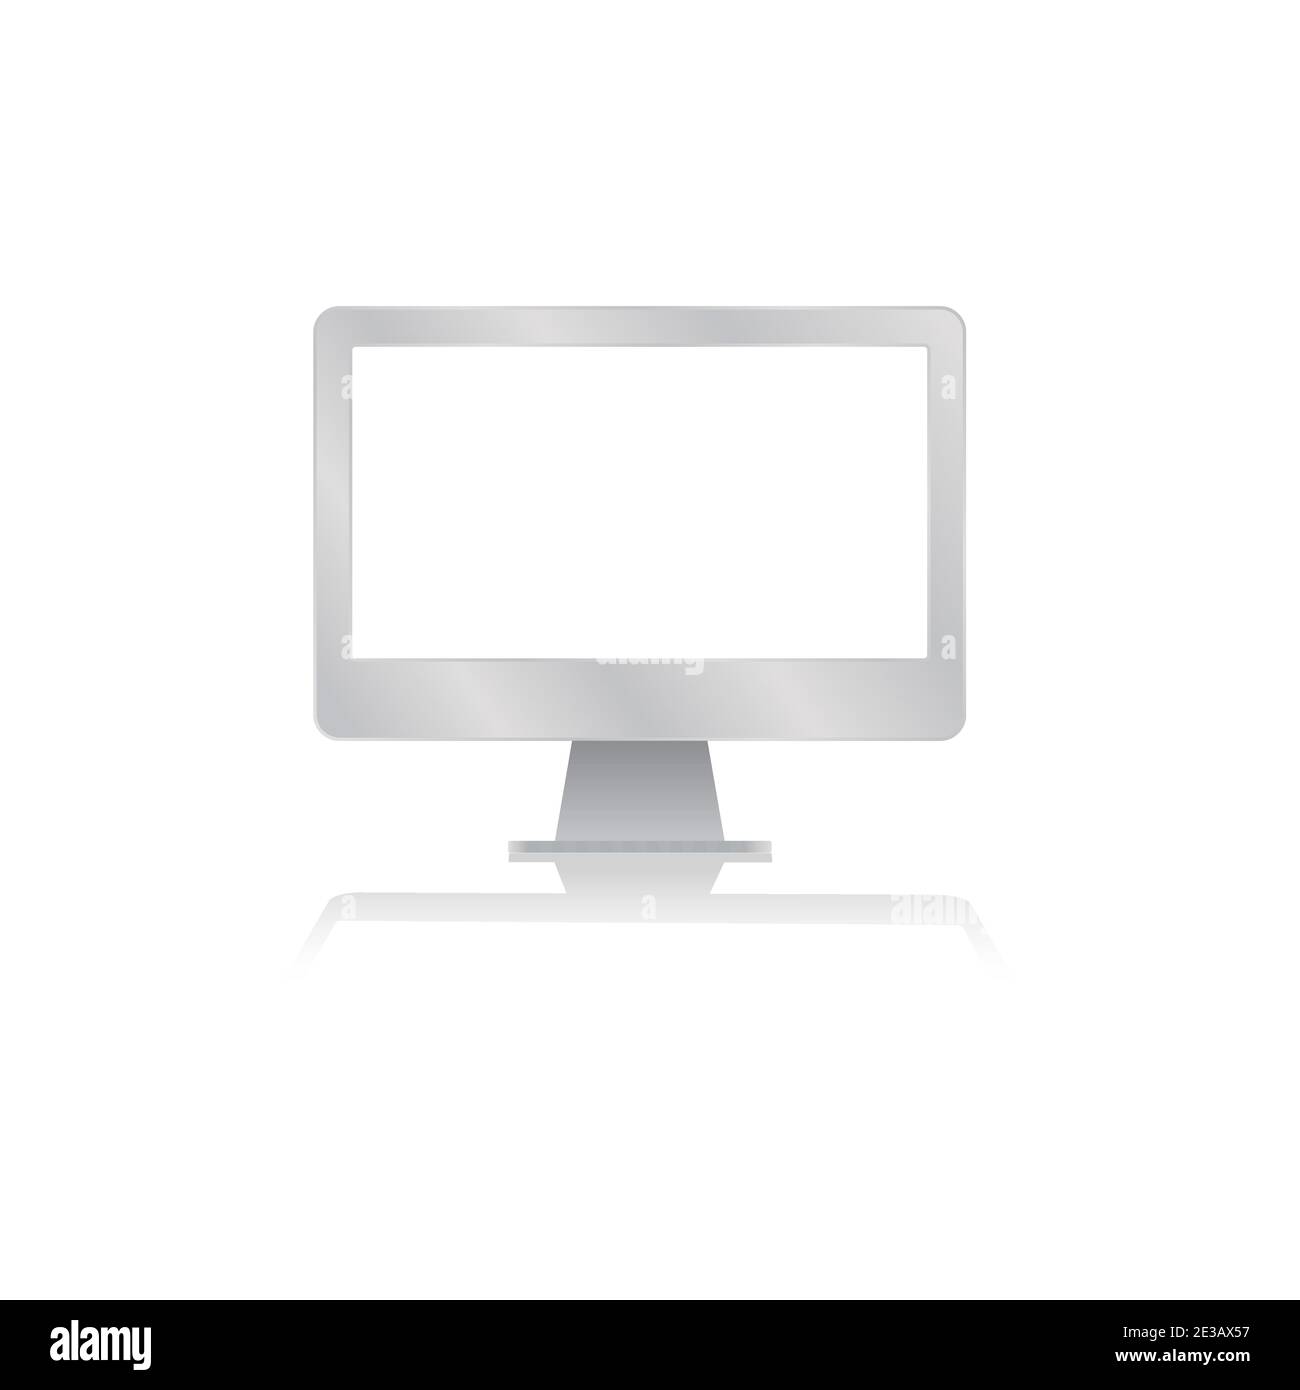 blank screen computer monitor with reflection minimalist modern icon vector illustration Stock Vector